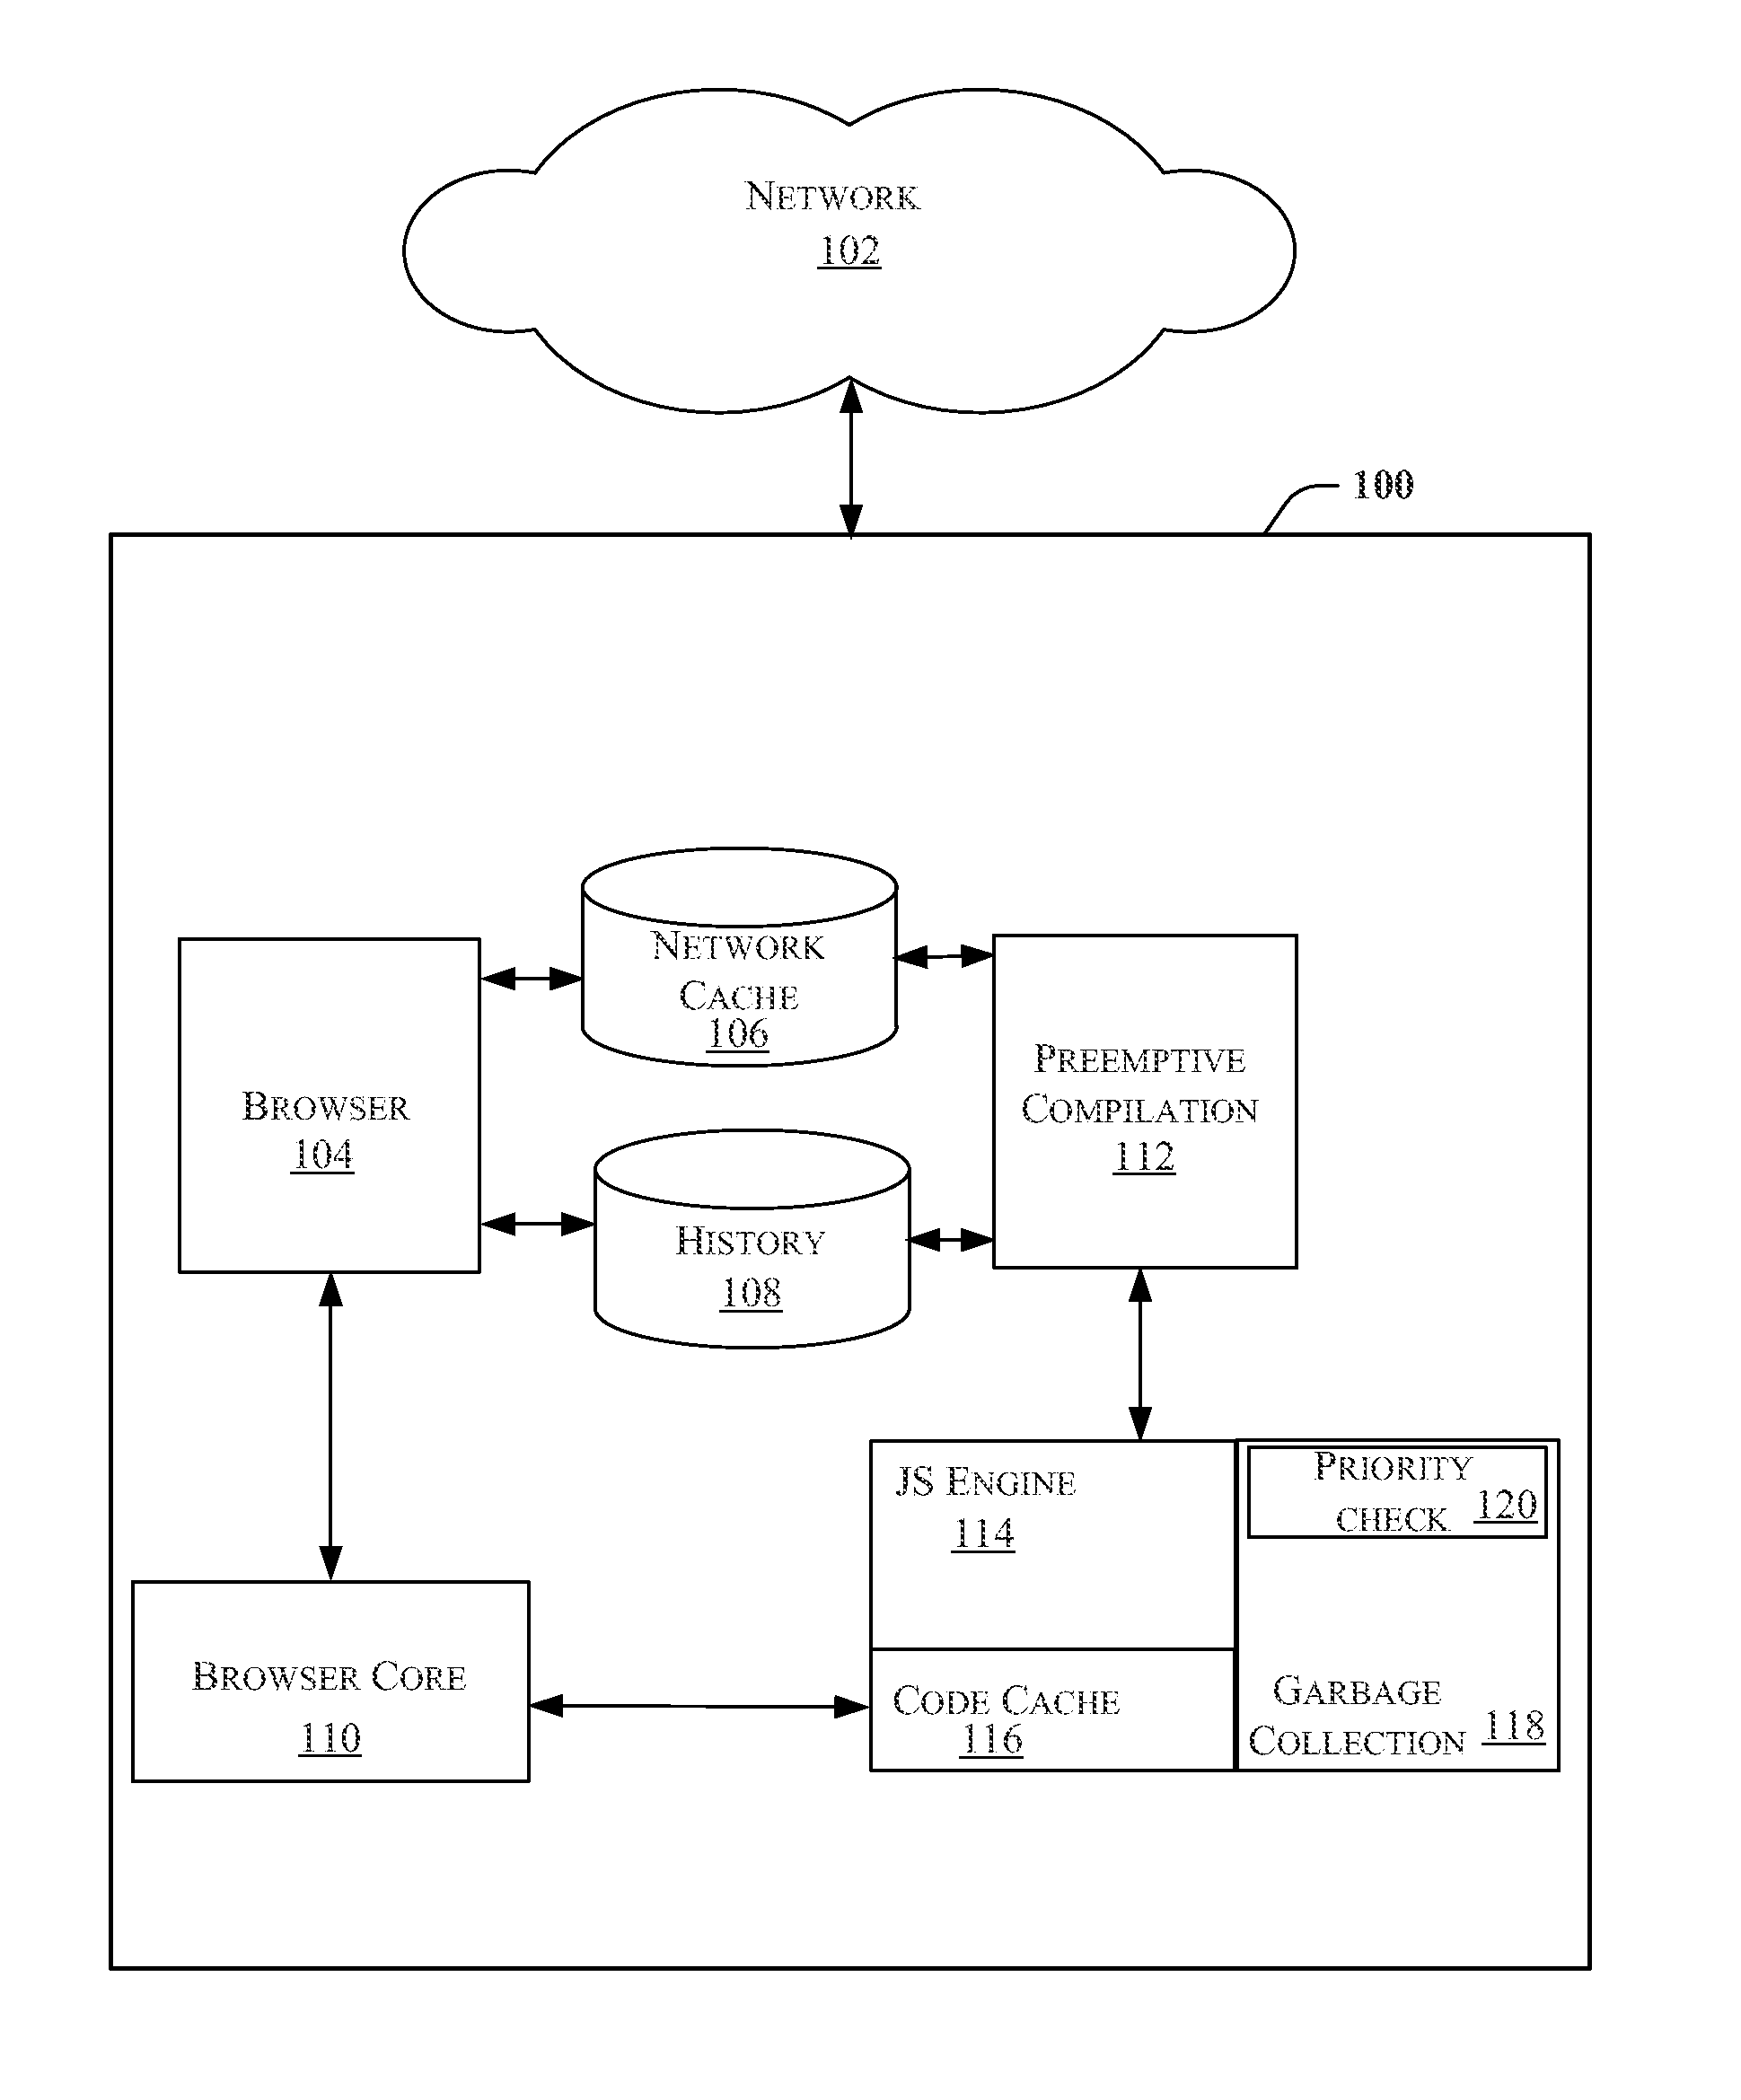 Methods and apparatus for improved browsing performance by precompilation of high-priority JavaScripts in a webpage and delaying the removal of corresponding compiled code